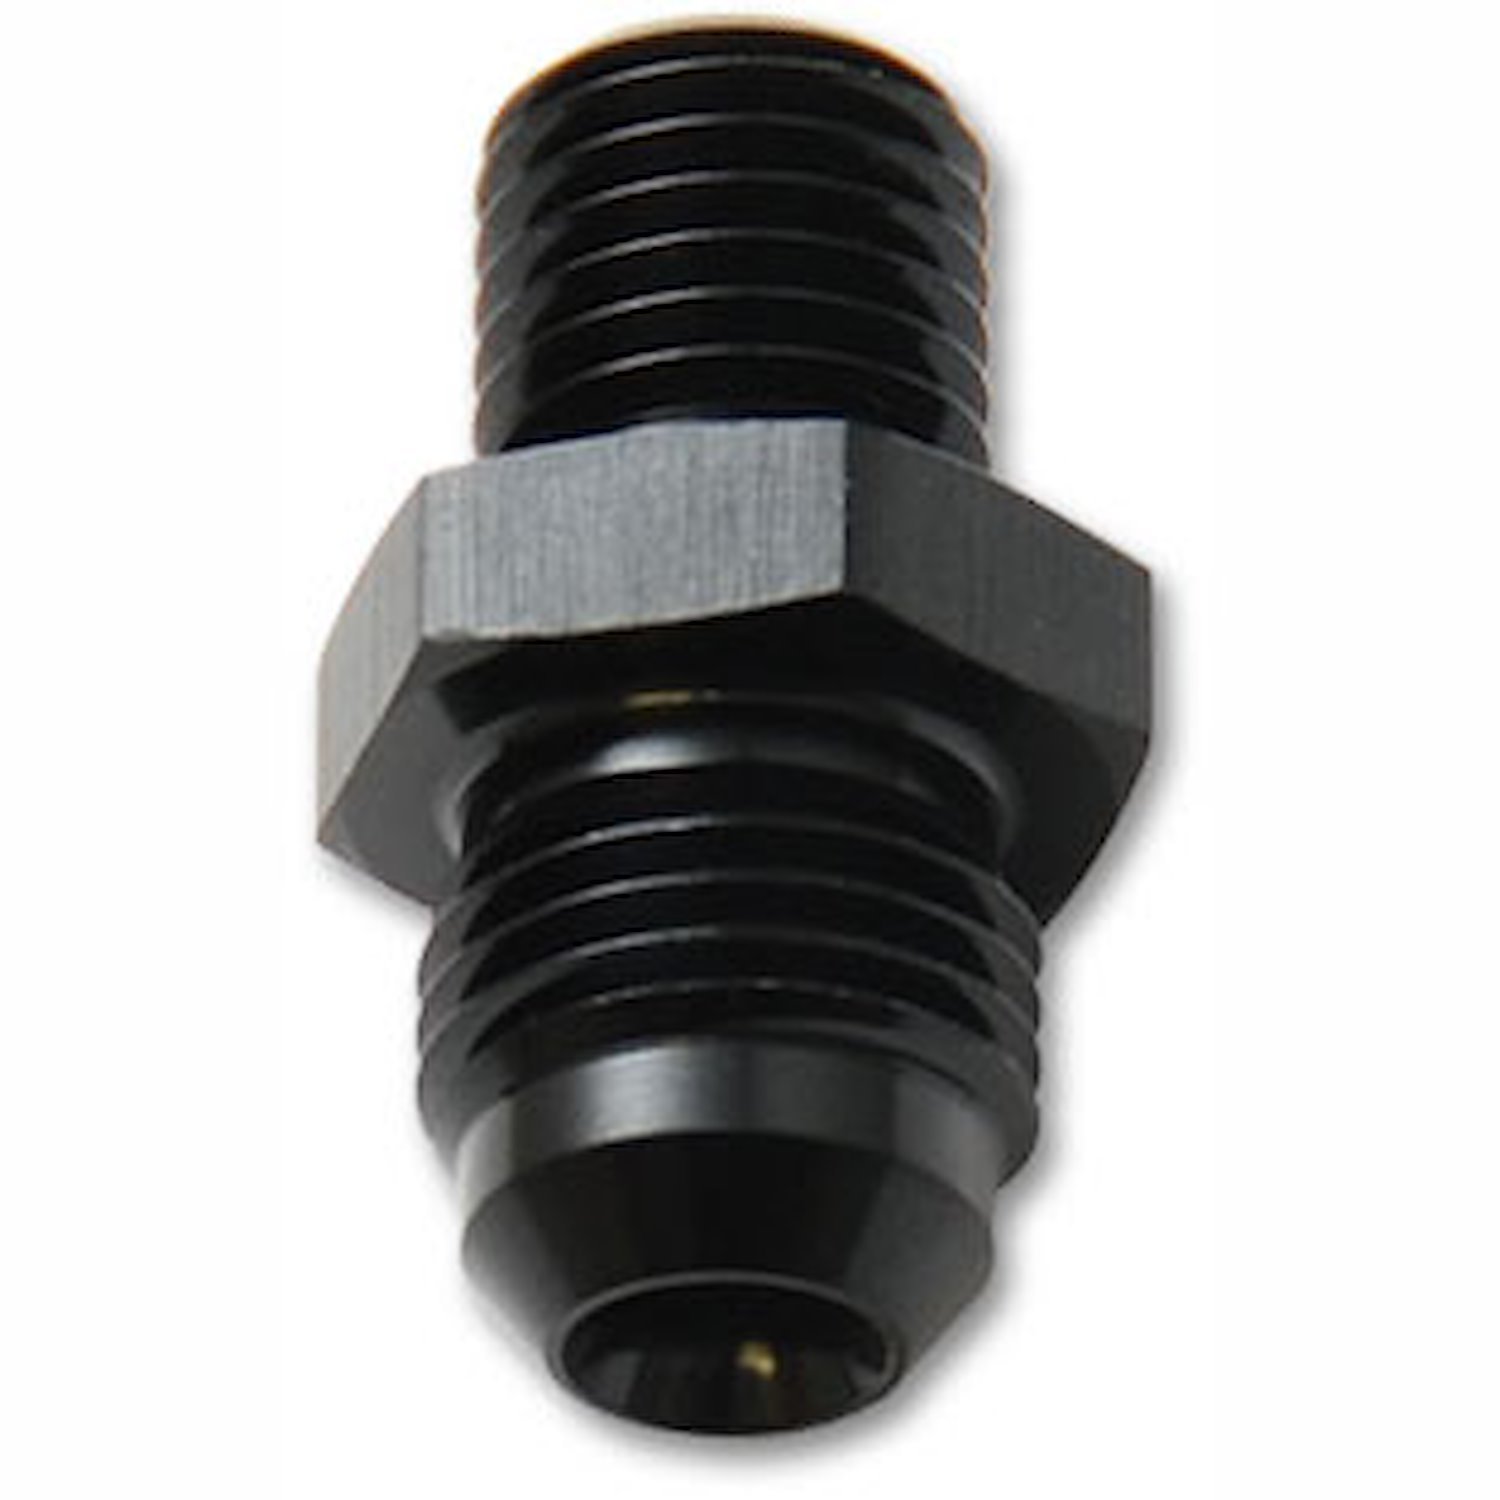 AN to Metric Adapter Fitting [-6 to 12mm x 1.25]